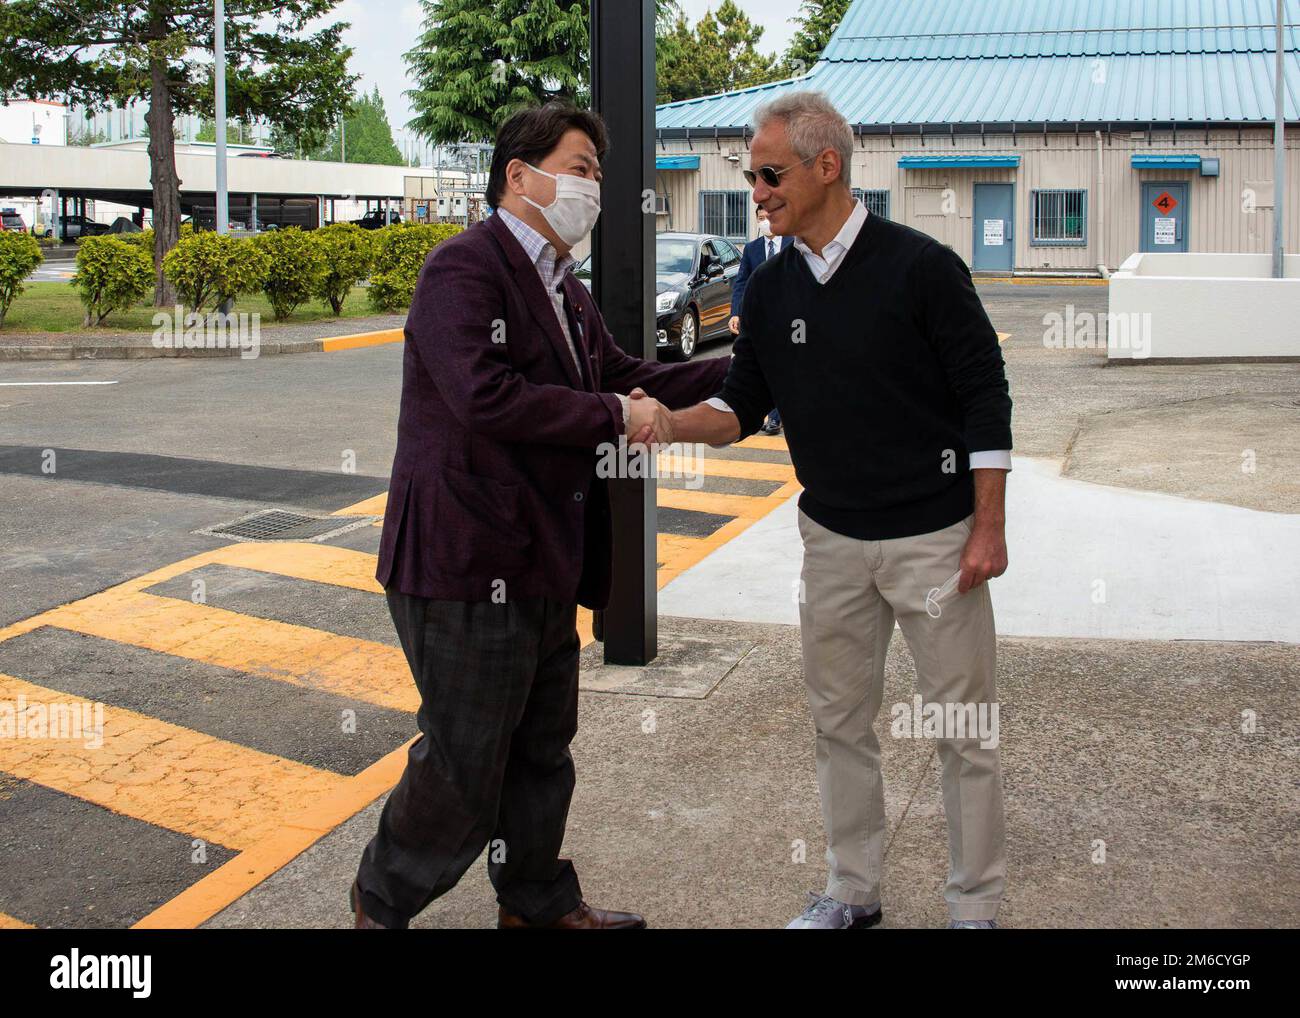 220423-N-DM318-1083 NAVAL AIR FACILITY ATSUGI, Japan (Apr. 23, 2022) The Honorable Rahm Emanuel, the U.S. ambassador to Japan, greets Yoshimasa Hayashi, Japan Minister of Foreign Affairs, during a stop at the base while en route, for an official visit, to the Nimitz-class aircraft carrier USS Abraham Lincoln (CVN-72). Naval Air Facility (NAF) Atsugi supports the combat readiness of Commander, Carrier Air Wing FIVE (CVW 5), Helicopter Maritime Strike Squadron FIVE ONE (HSM-51) and 30 other tenant commands and provides logistic support, coordination, and services to units assigned to the Western Stock Photo